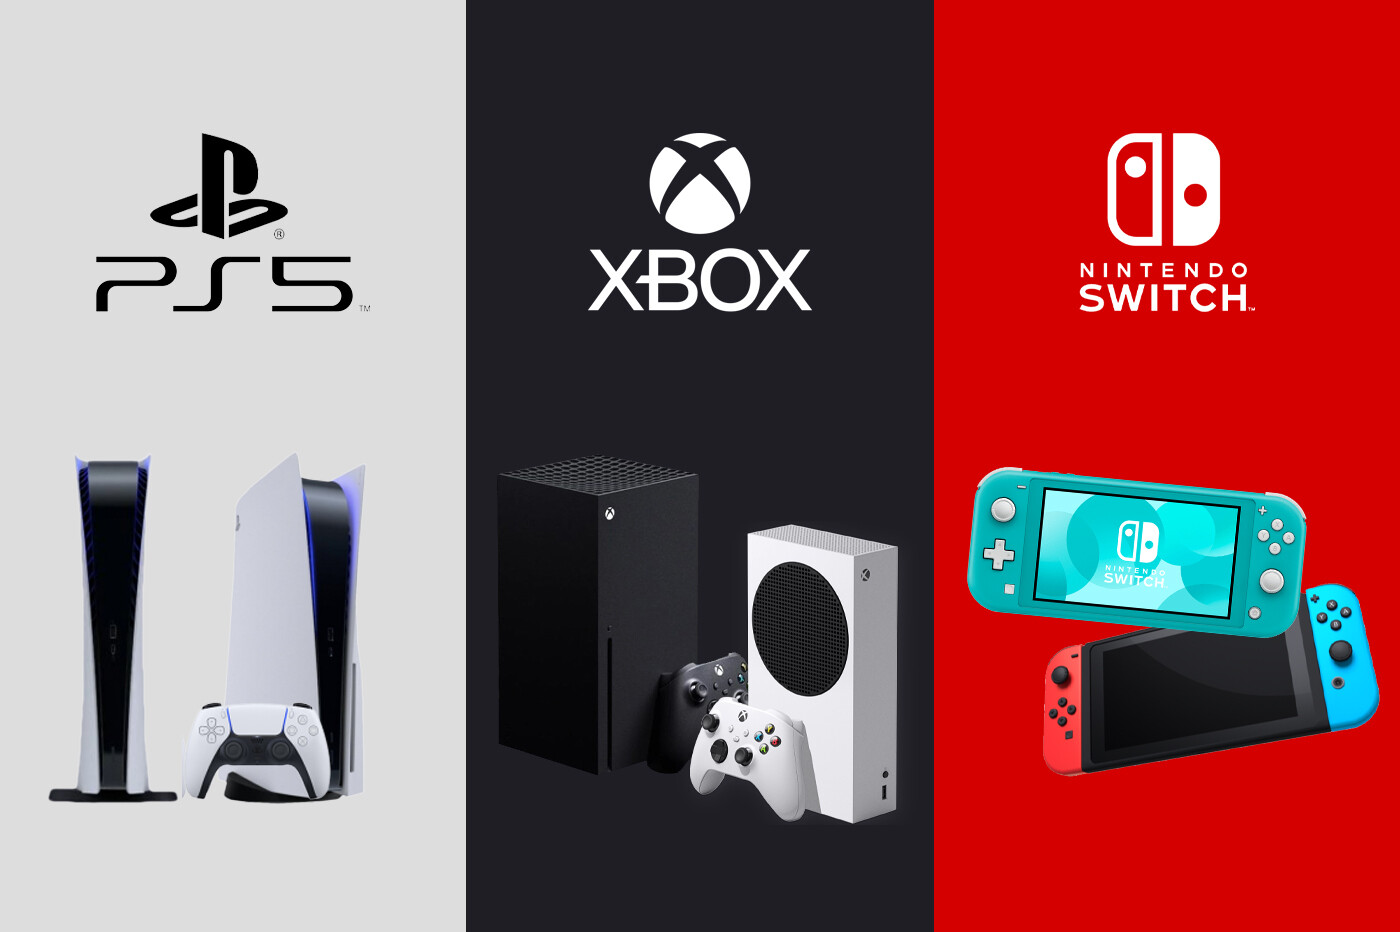 Best Deals on PS5, Xbox, Nintendo Switch: Black Friday Sales